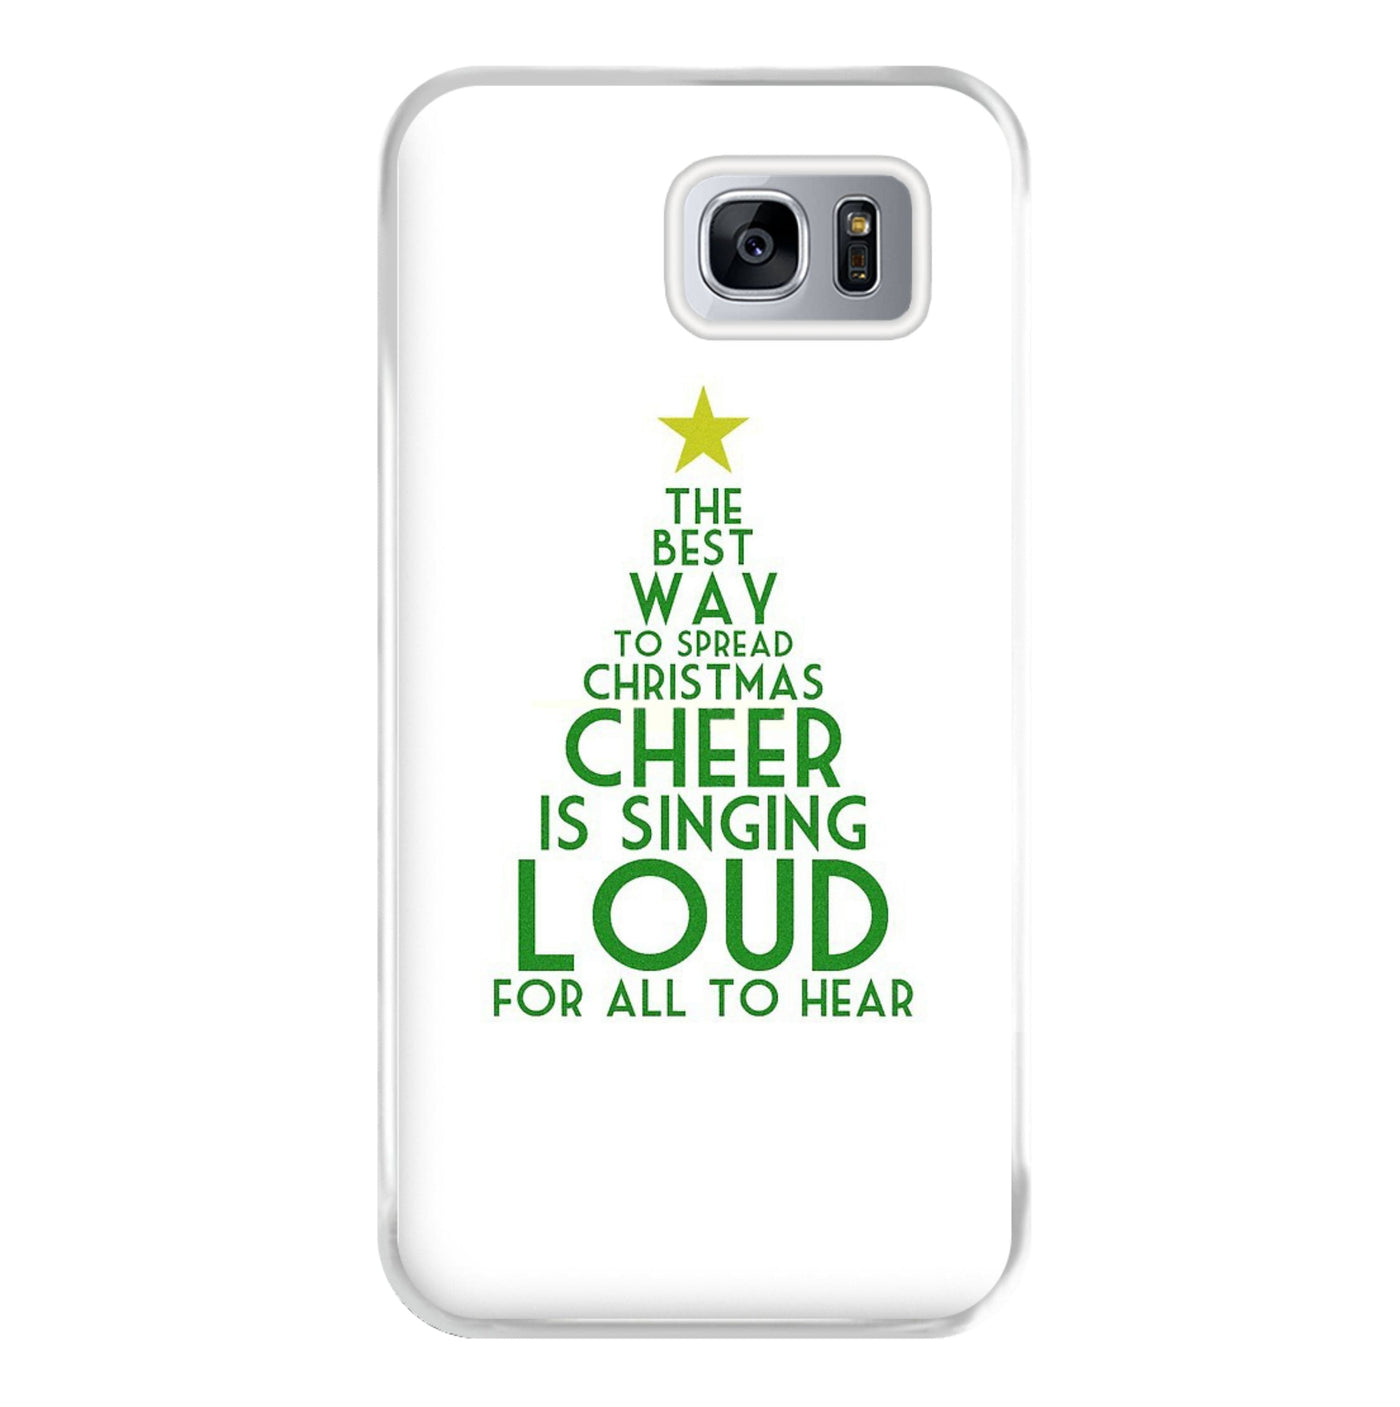 The Best Way To Spread Christmas Cheer - Elf Phone Case